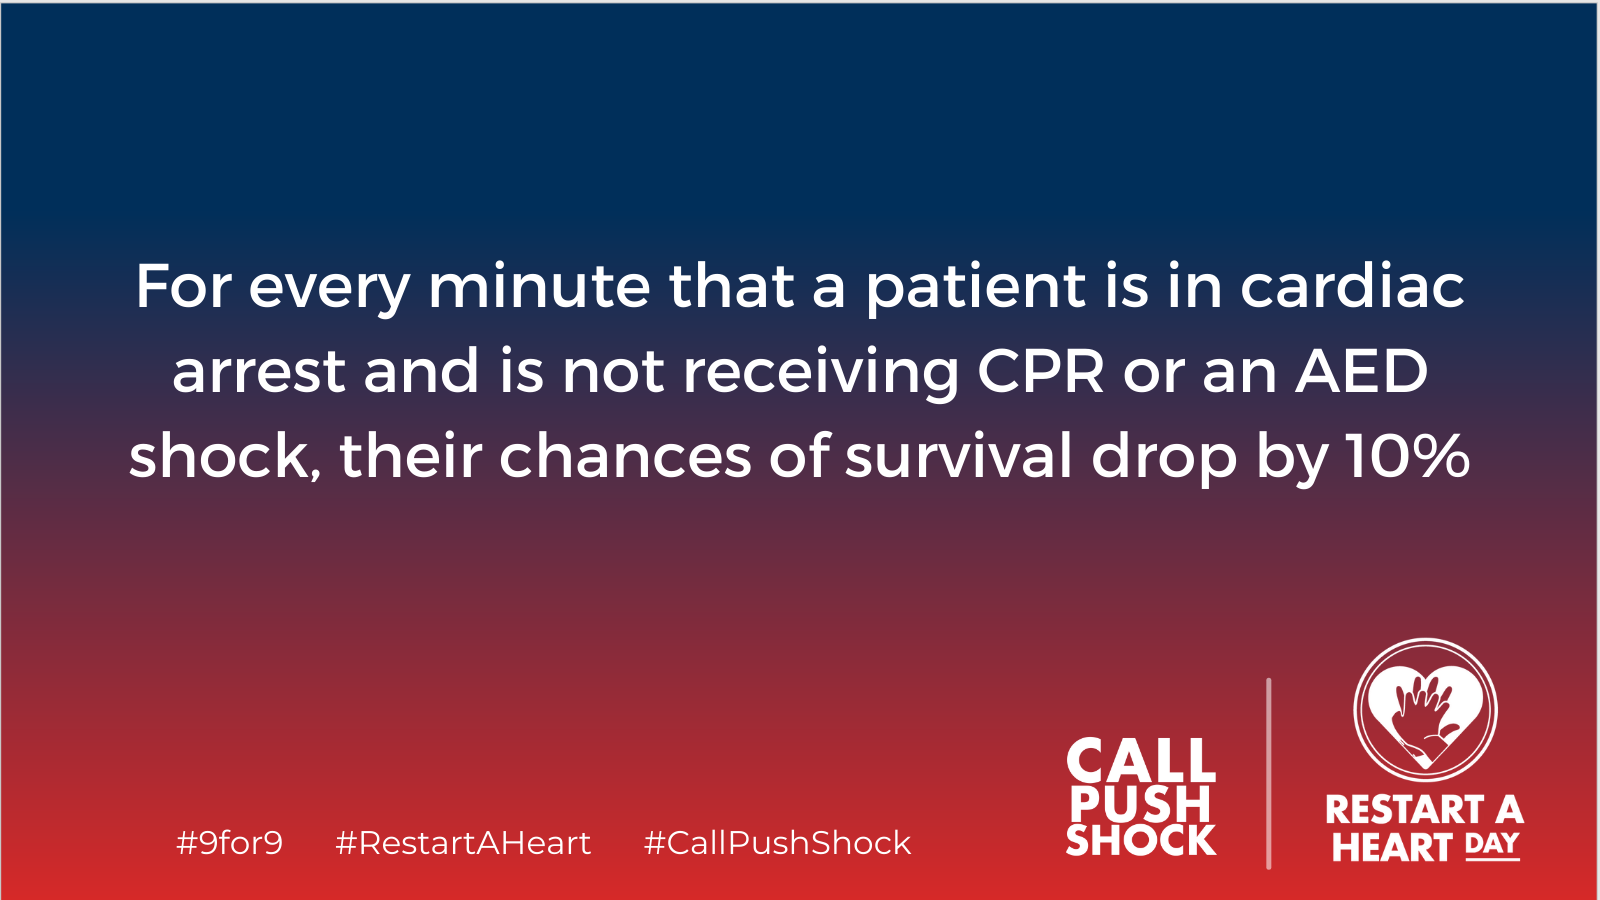 For every minute that a patient is in cardiac arrest and isnot receiving CPR or an AED shock, their chances of survival drop by 10%.